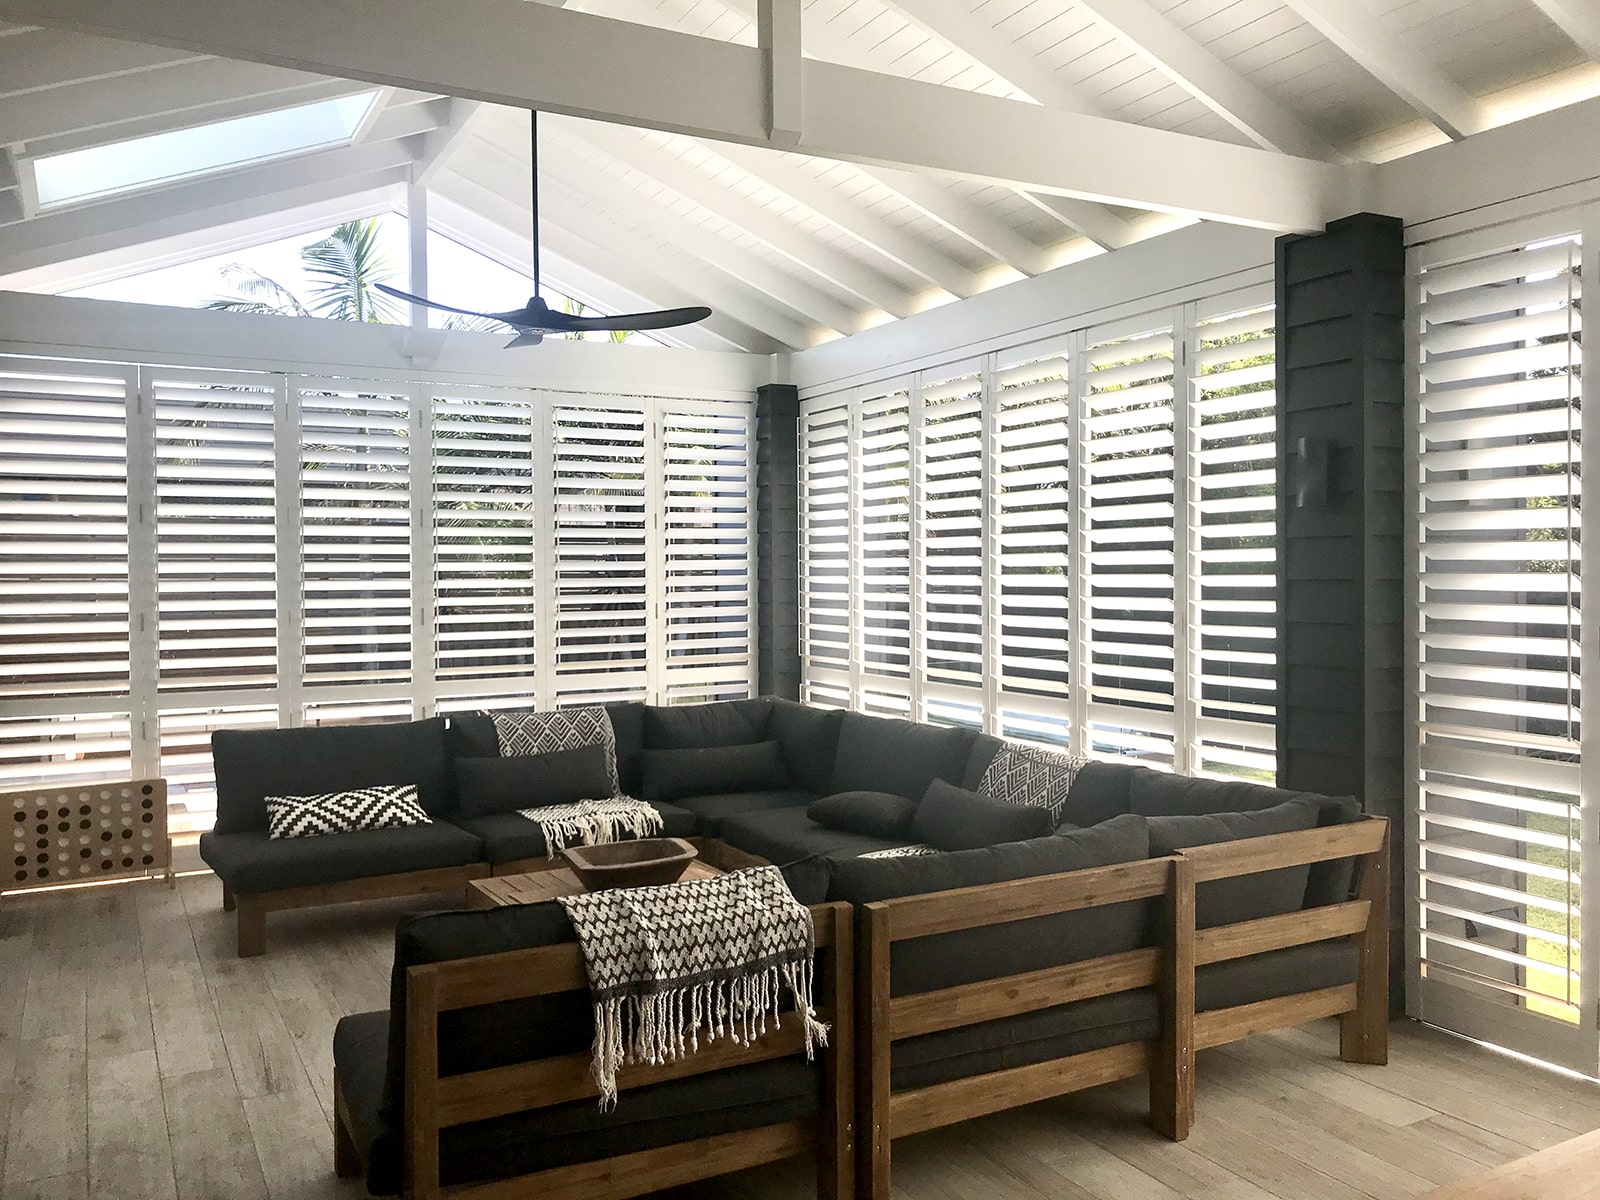 White plantation shutters lining the roof of a patio area surrounded with windows, white leather couches, a beige rug and dark wood patio furniture.